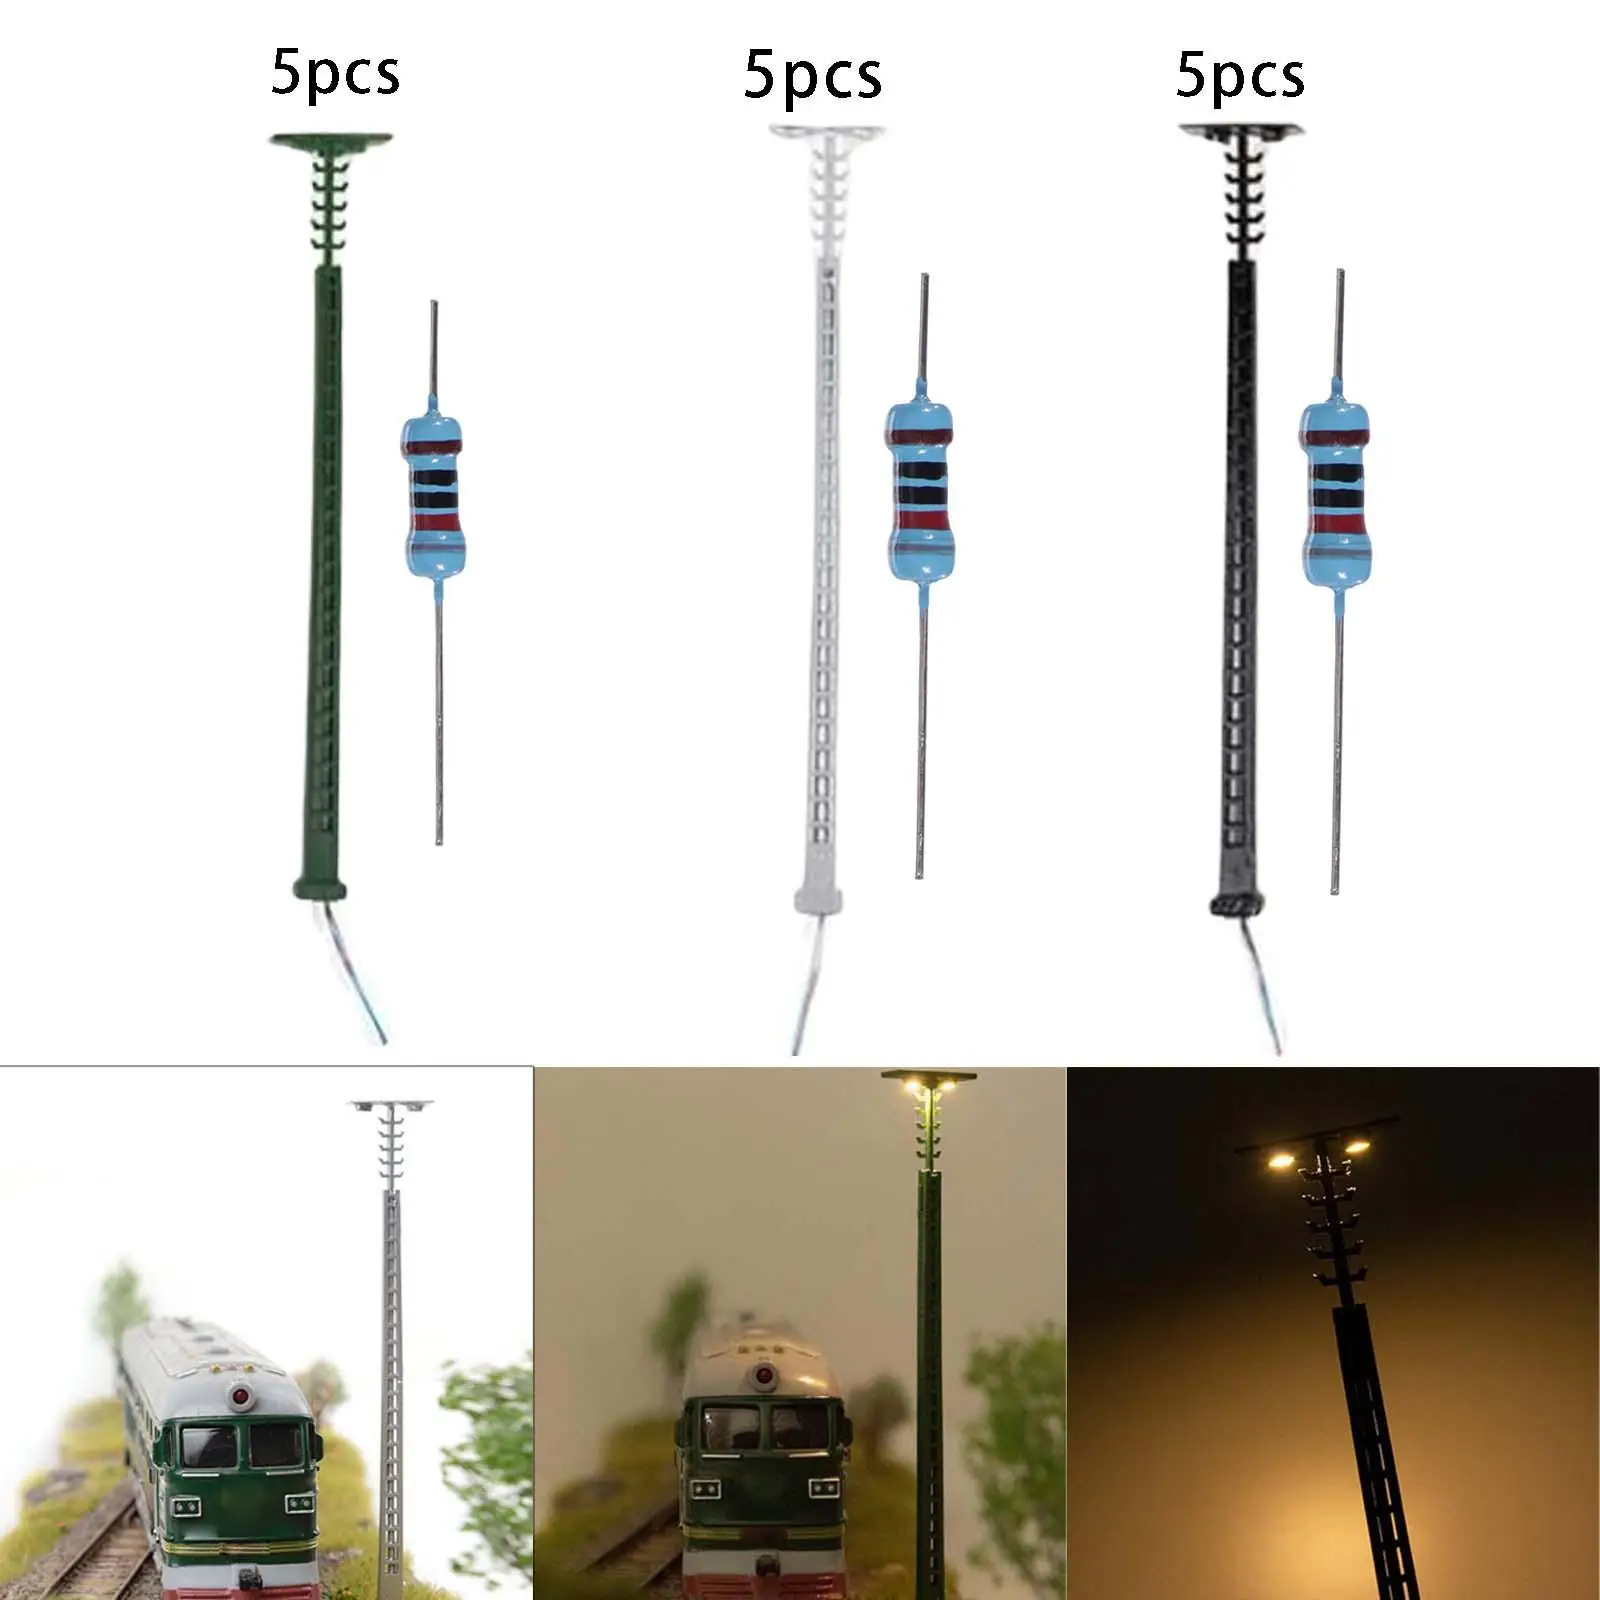 5 Pieces Model Railway Lights HO Scale for Micro Landscape Street Scenery